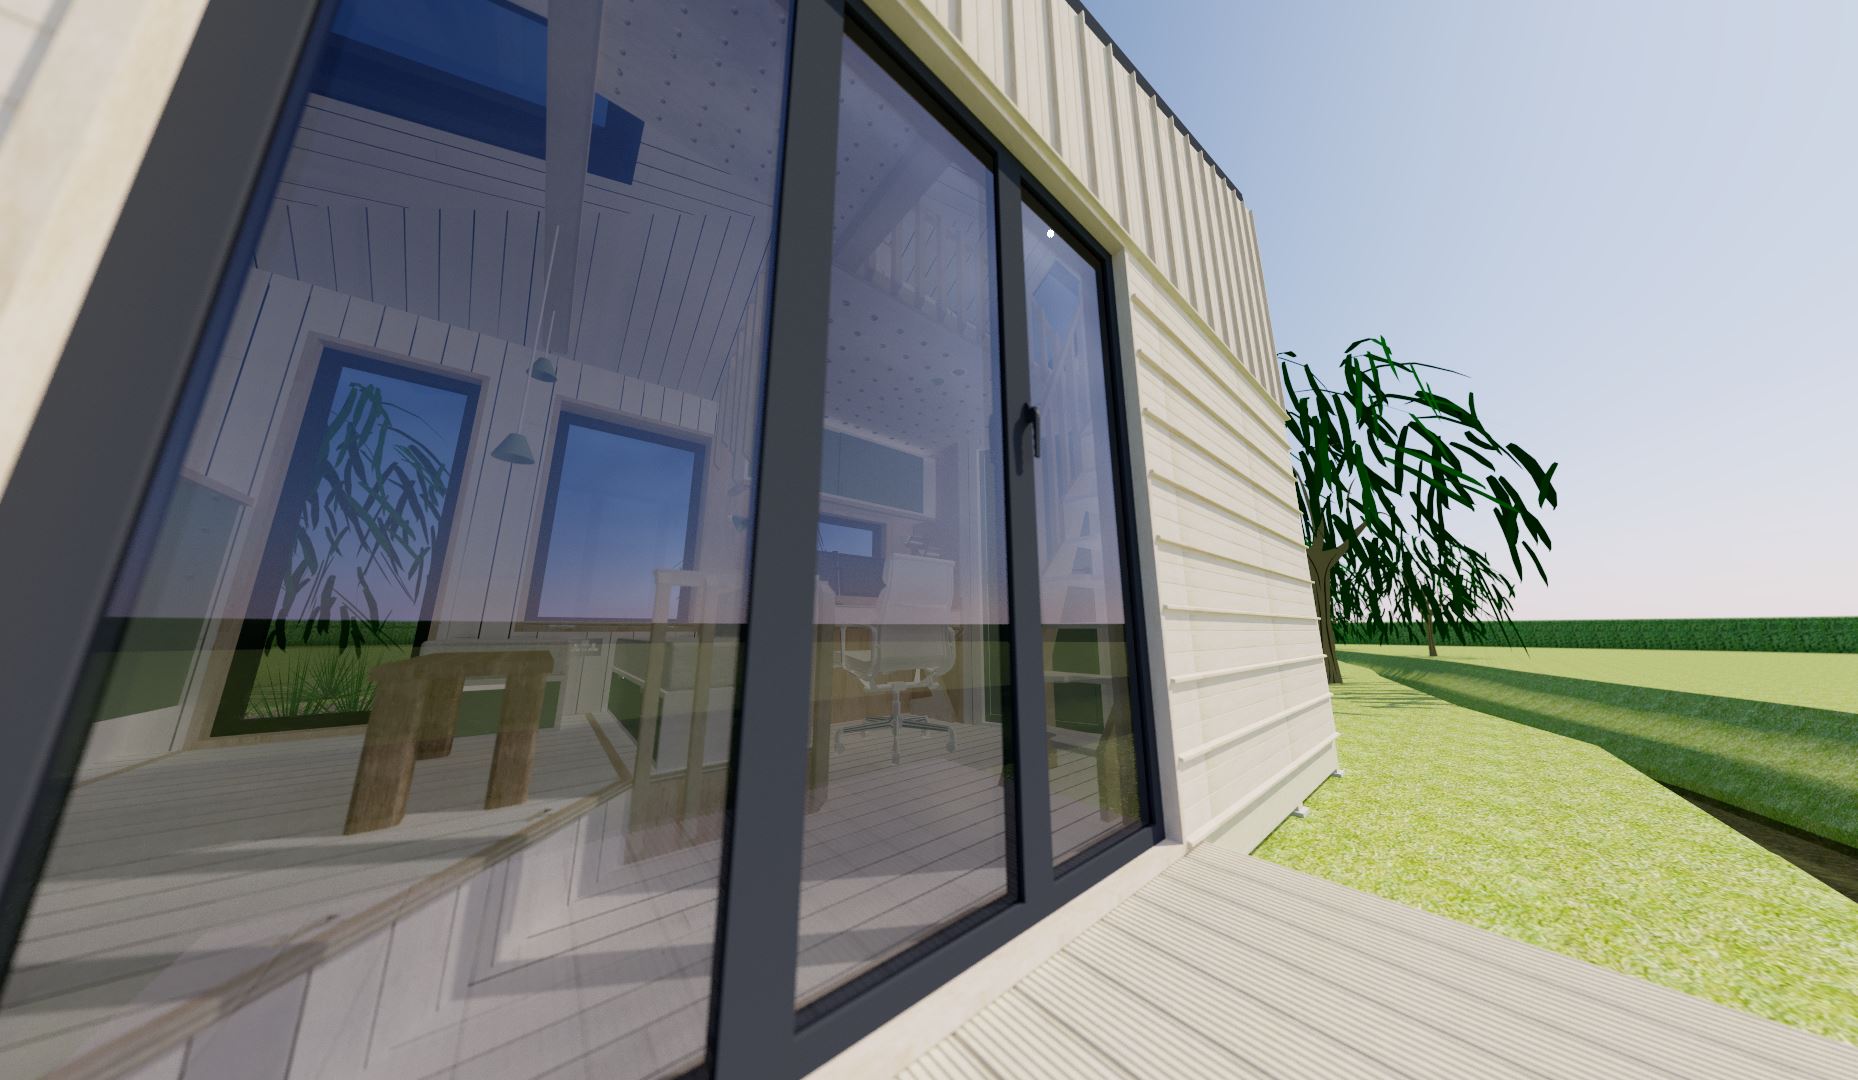 The large 3-leaf bi-fold door not only lets in a ton of natural light, but it also helps make the space inside larger.